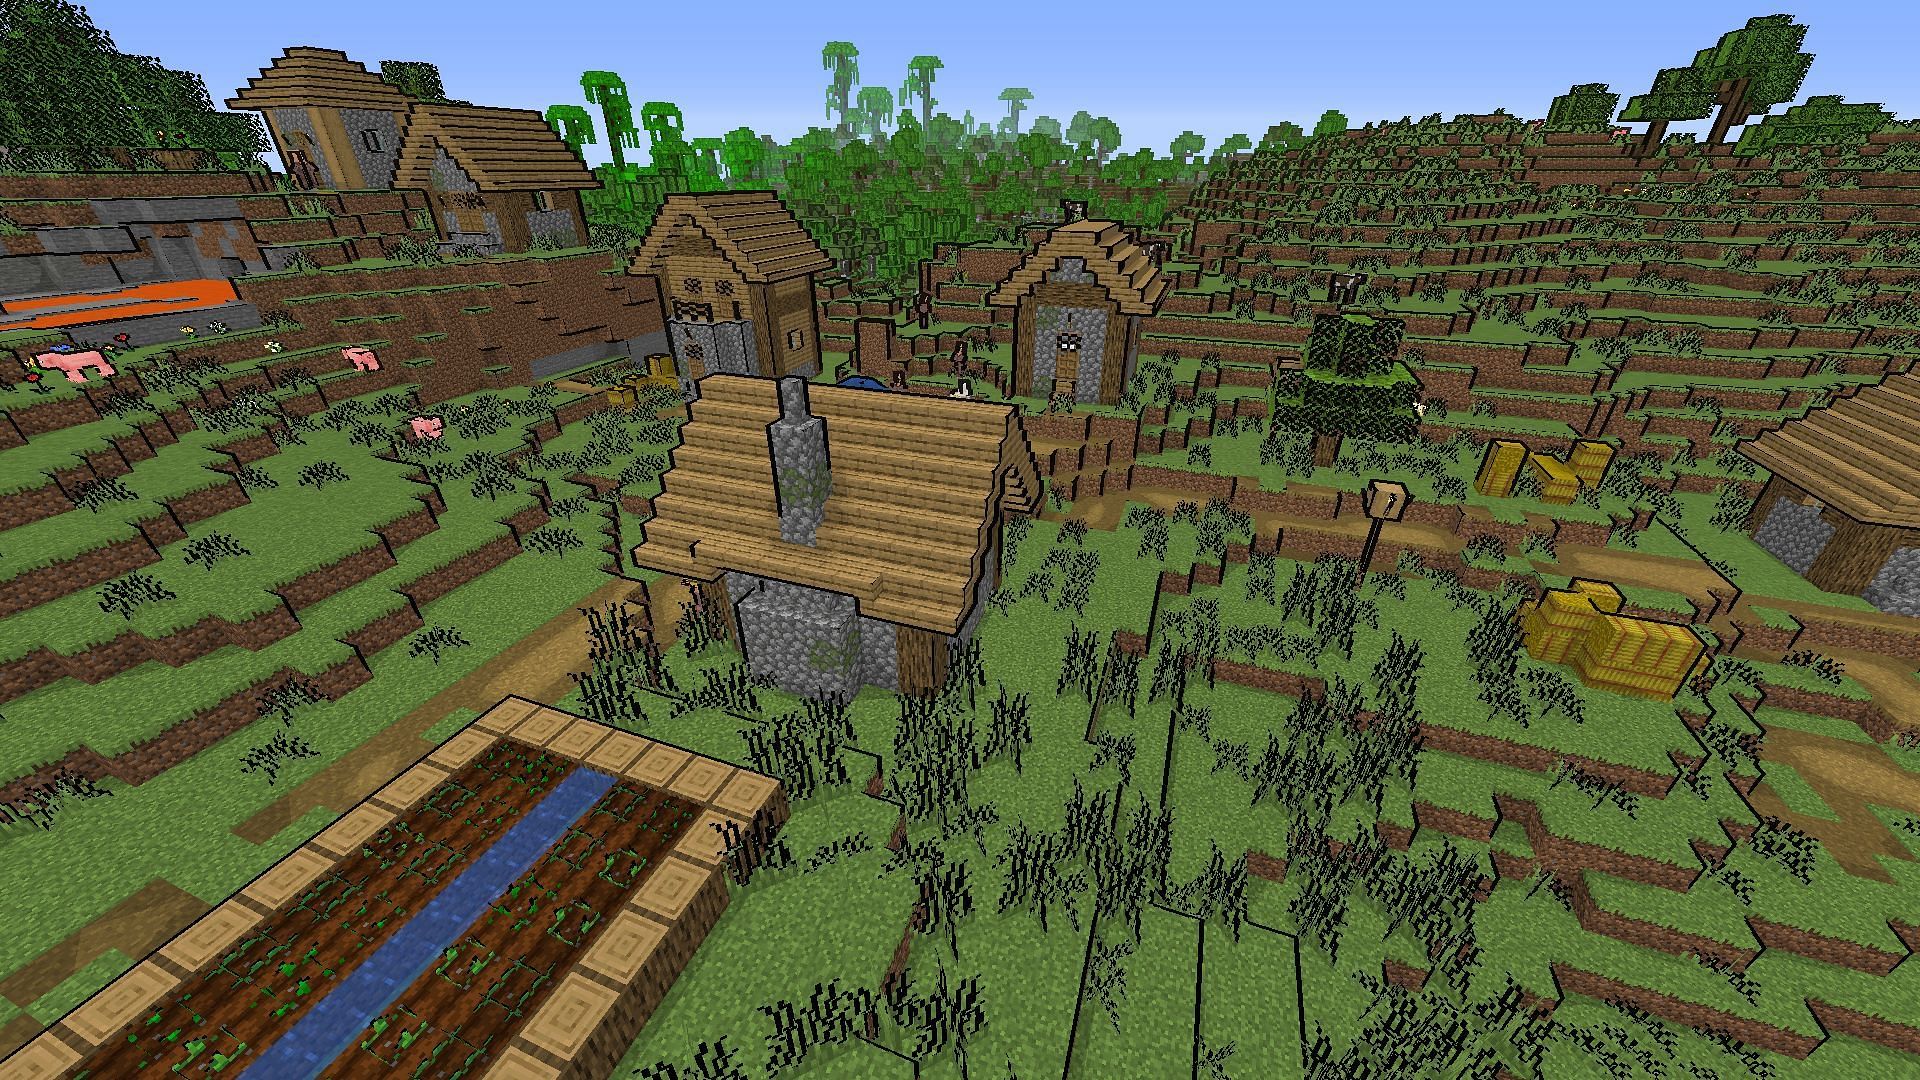 The Plains Village with Naelego's Cel Shader applied (Image via Minecraft)